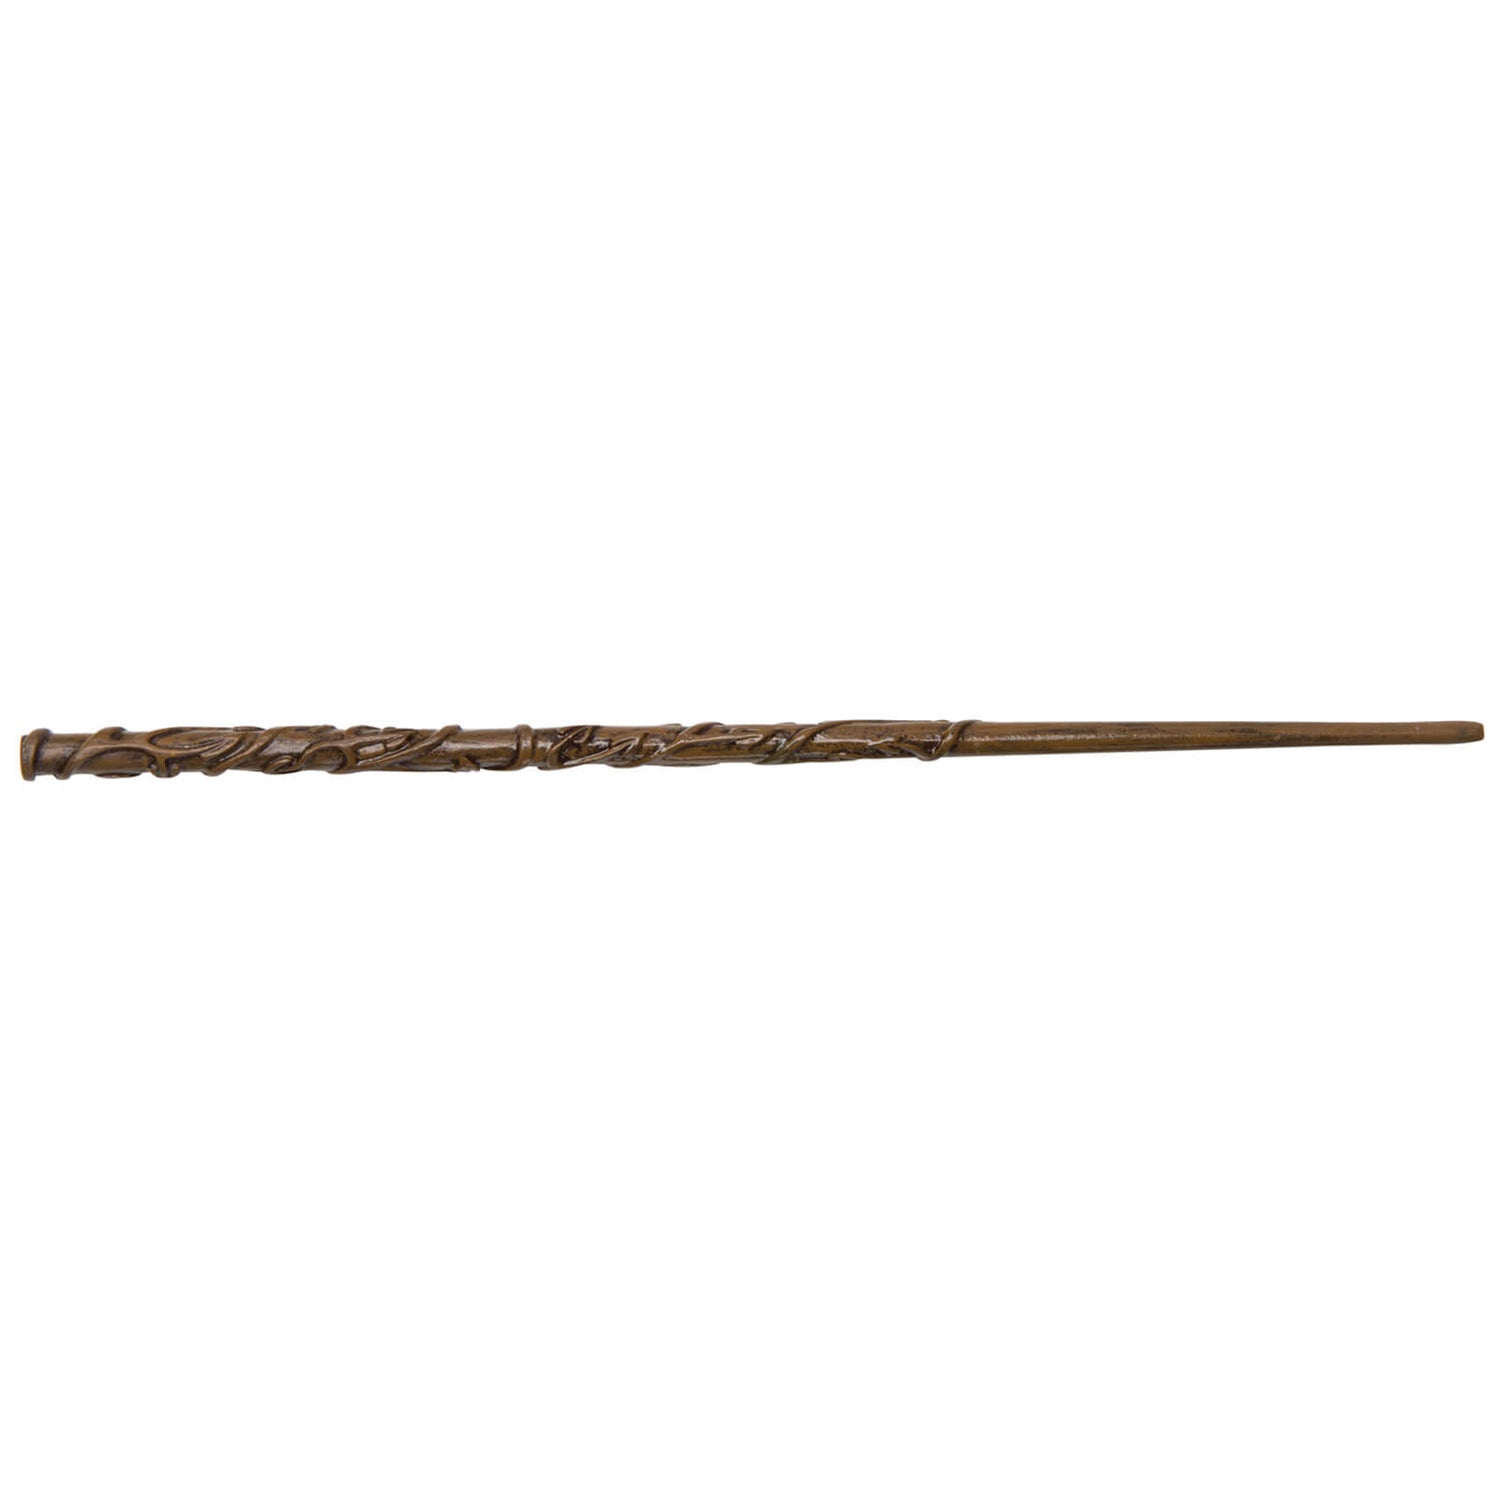 Official Rubies Harry Potter Wizarding World Hermione Deluxe Wand